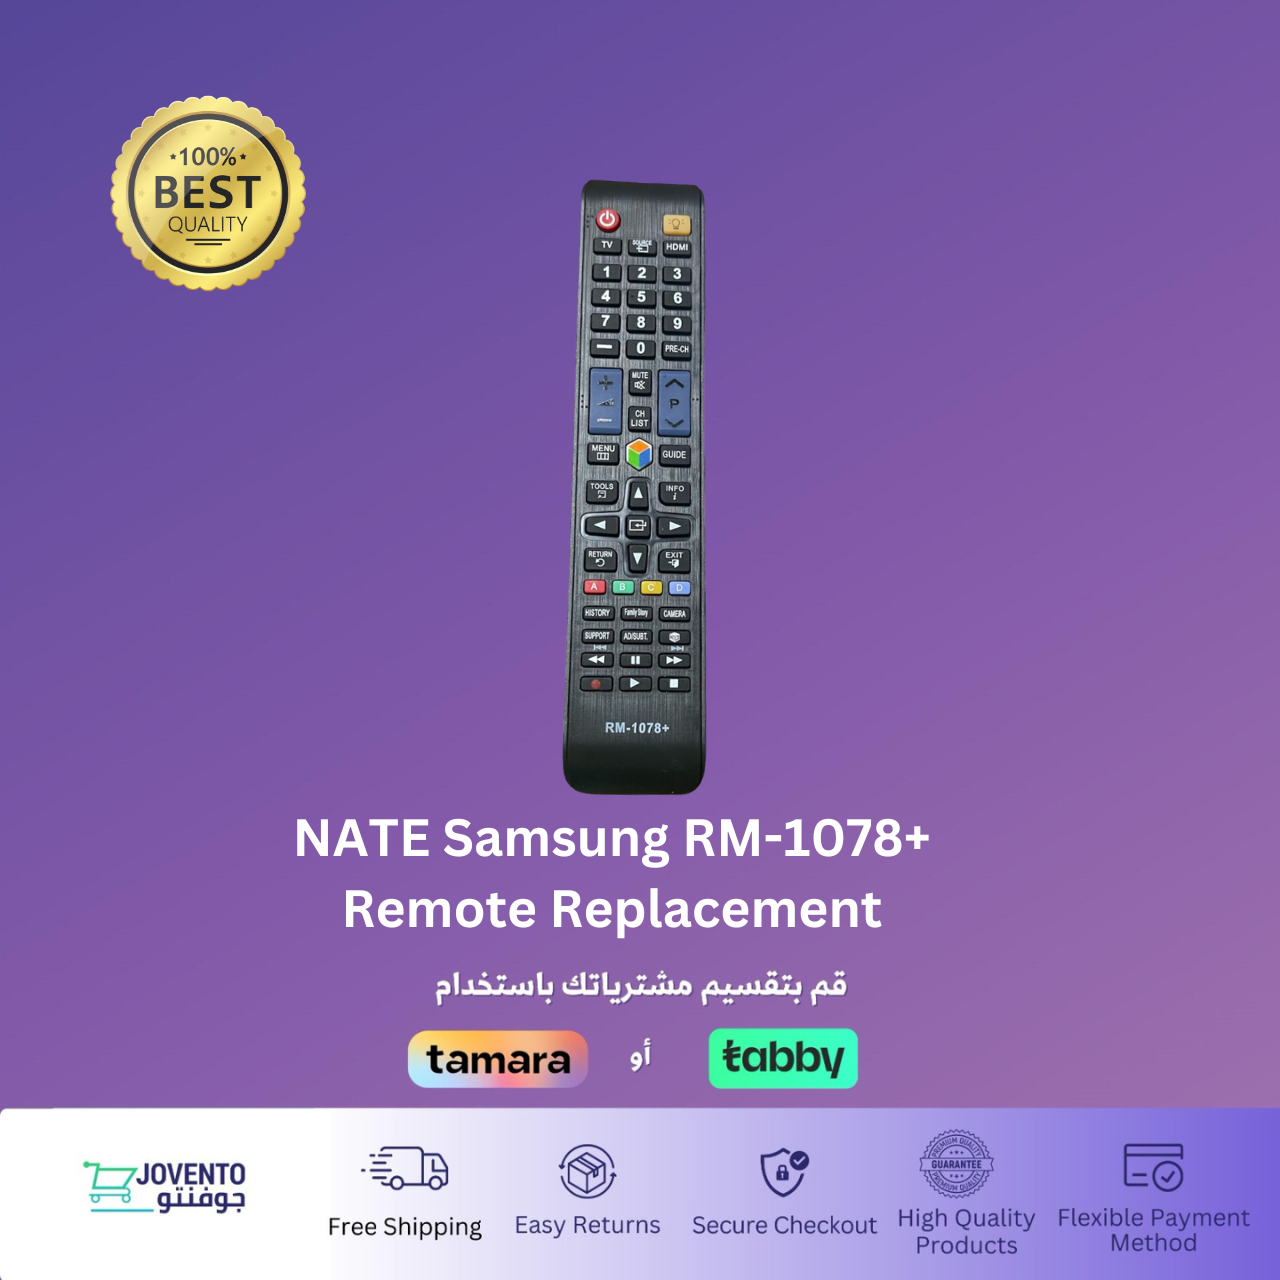 NATE Samsung RM-1078+ Remote Replacement